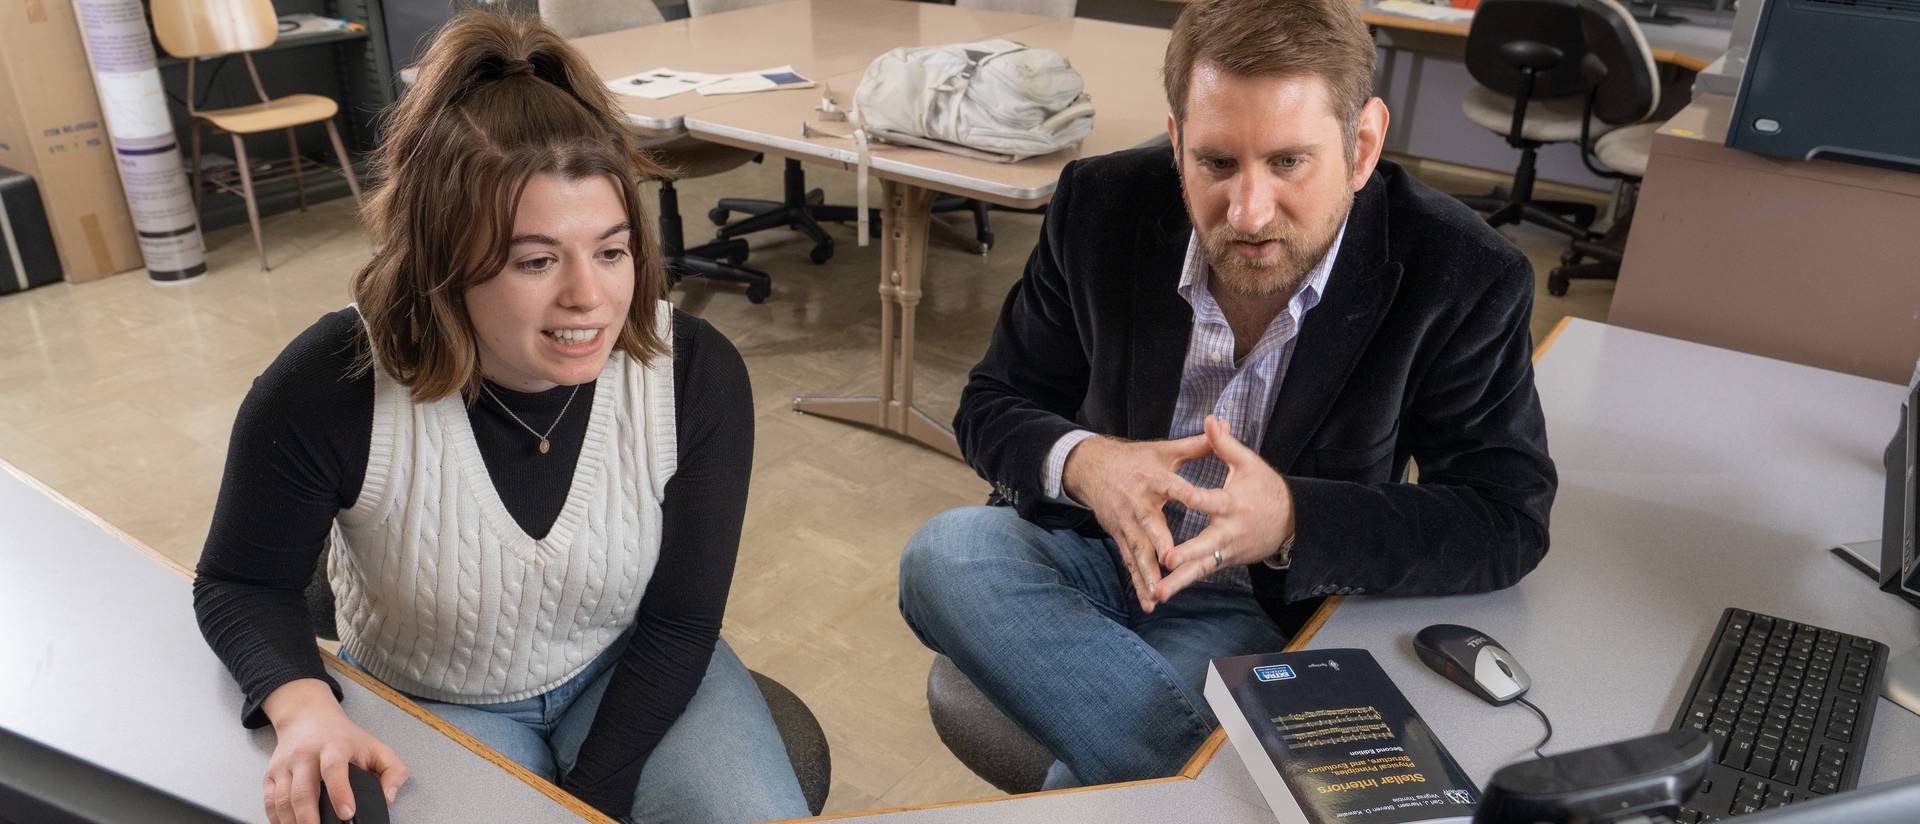 Sophomore Alexis Rustin and Dr. William Wolf, assistant professor of physics and astronomy